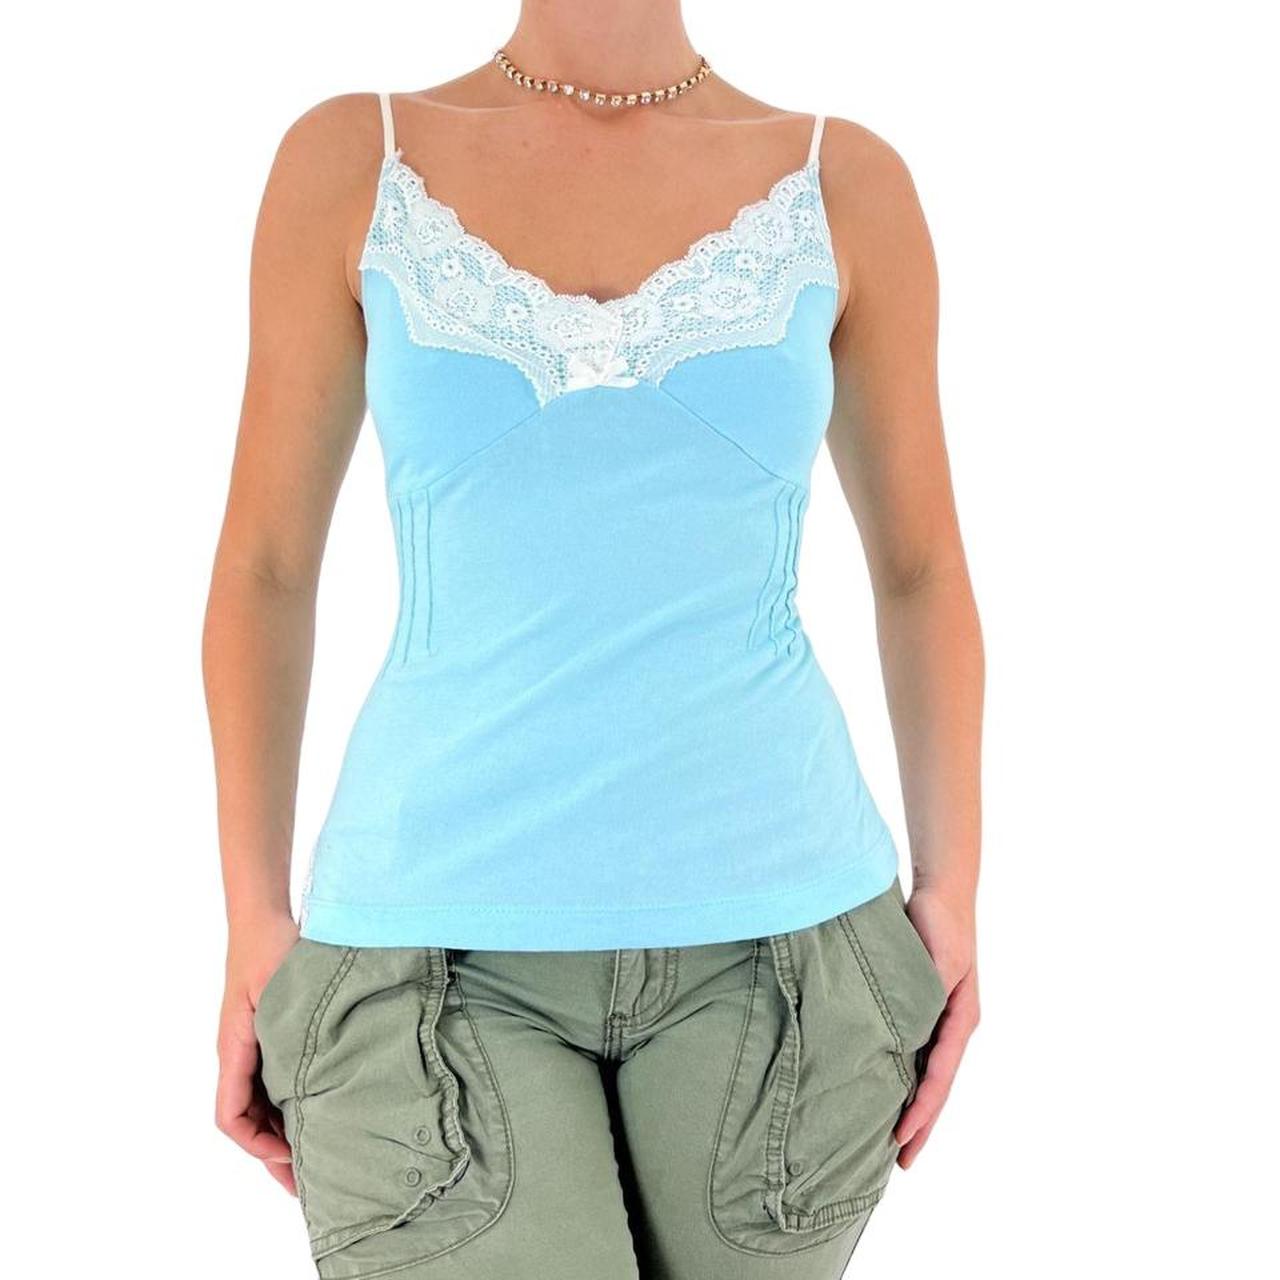 Y2k Vintage Baby Blue Stretchy Tank Top w/ White Floral Lace Trim [S]